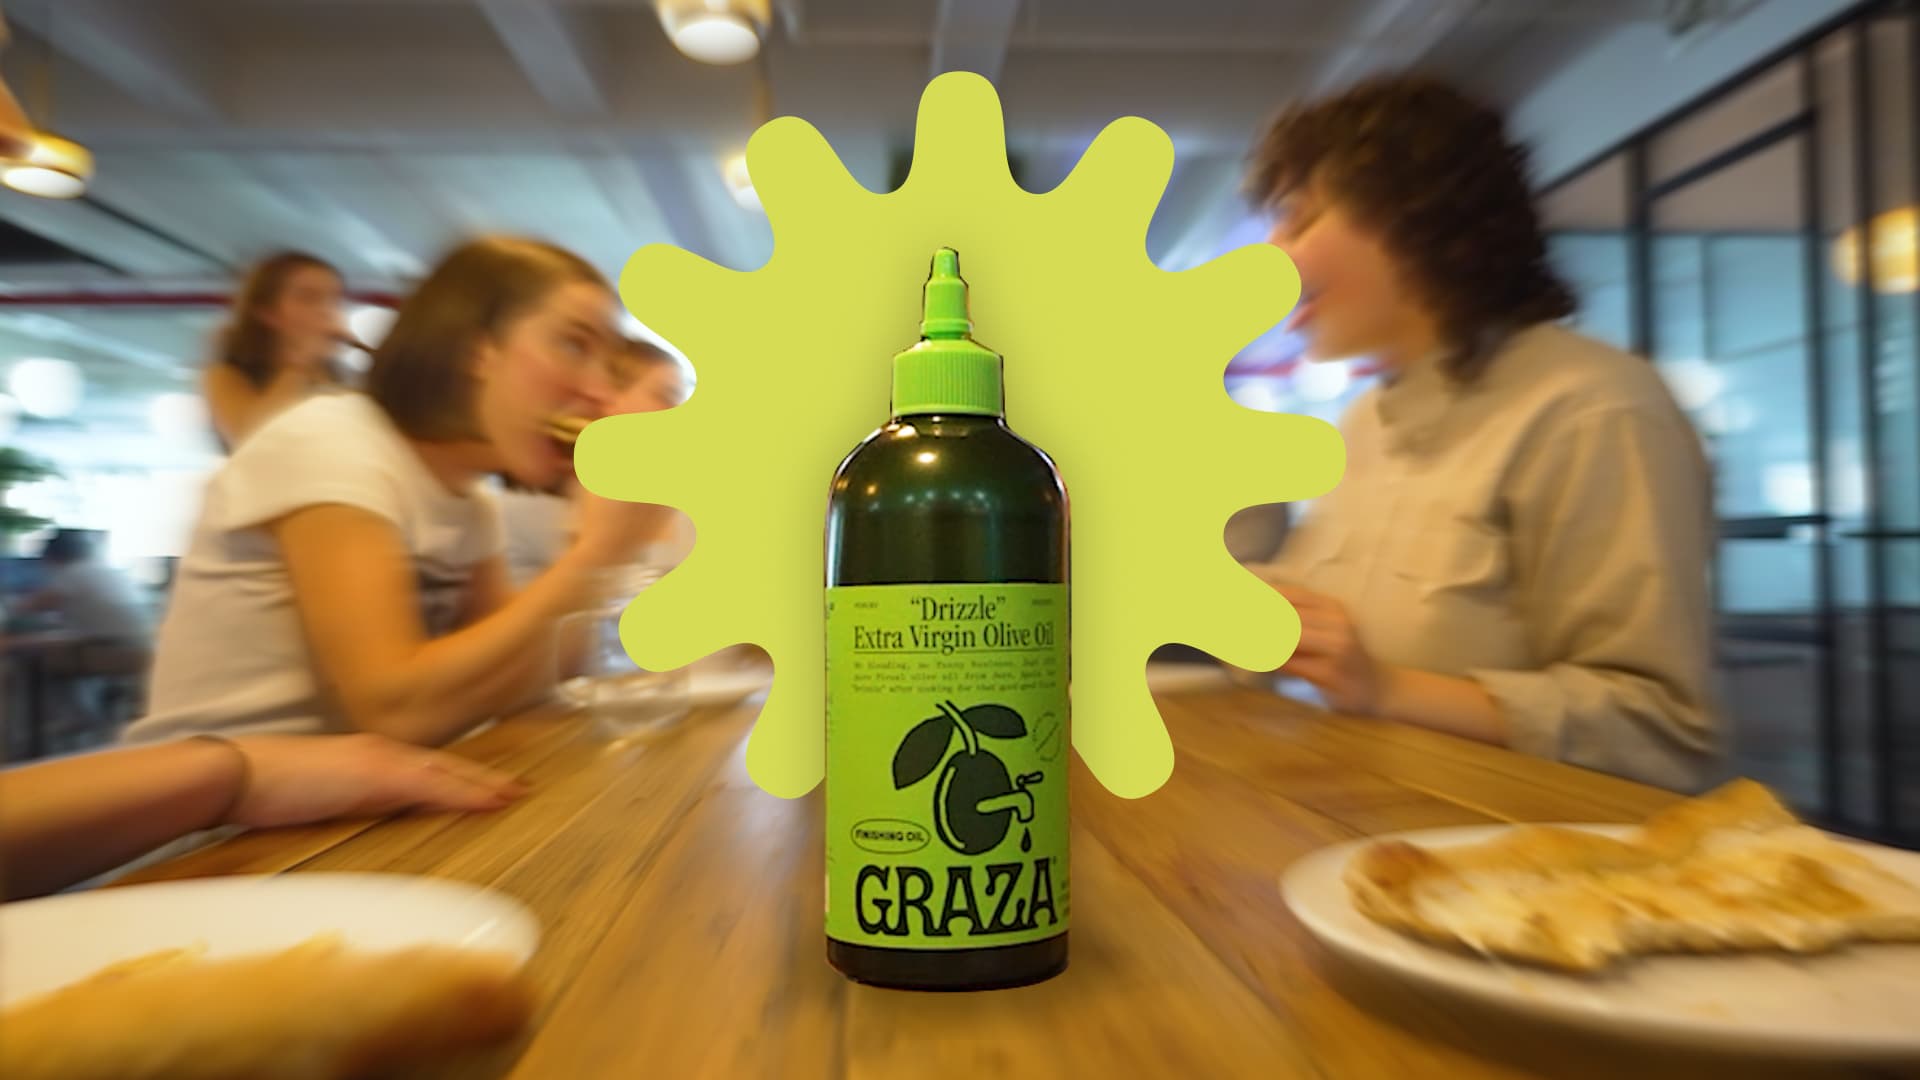 How olive oil startup Graza brings in $48 million a year